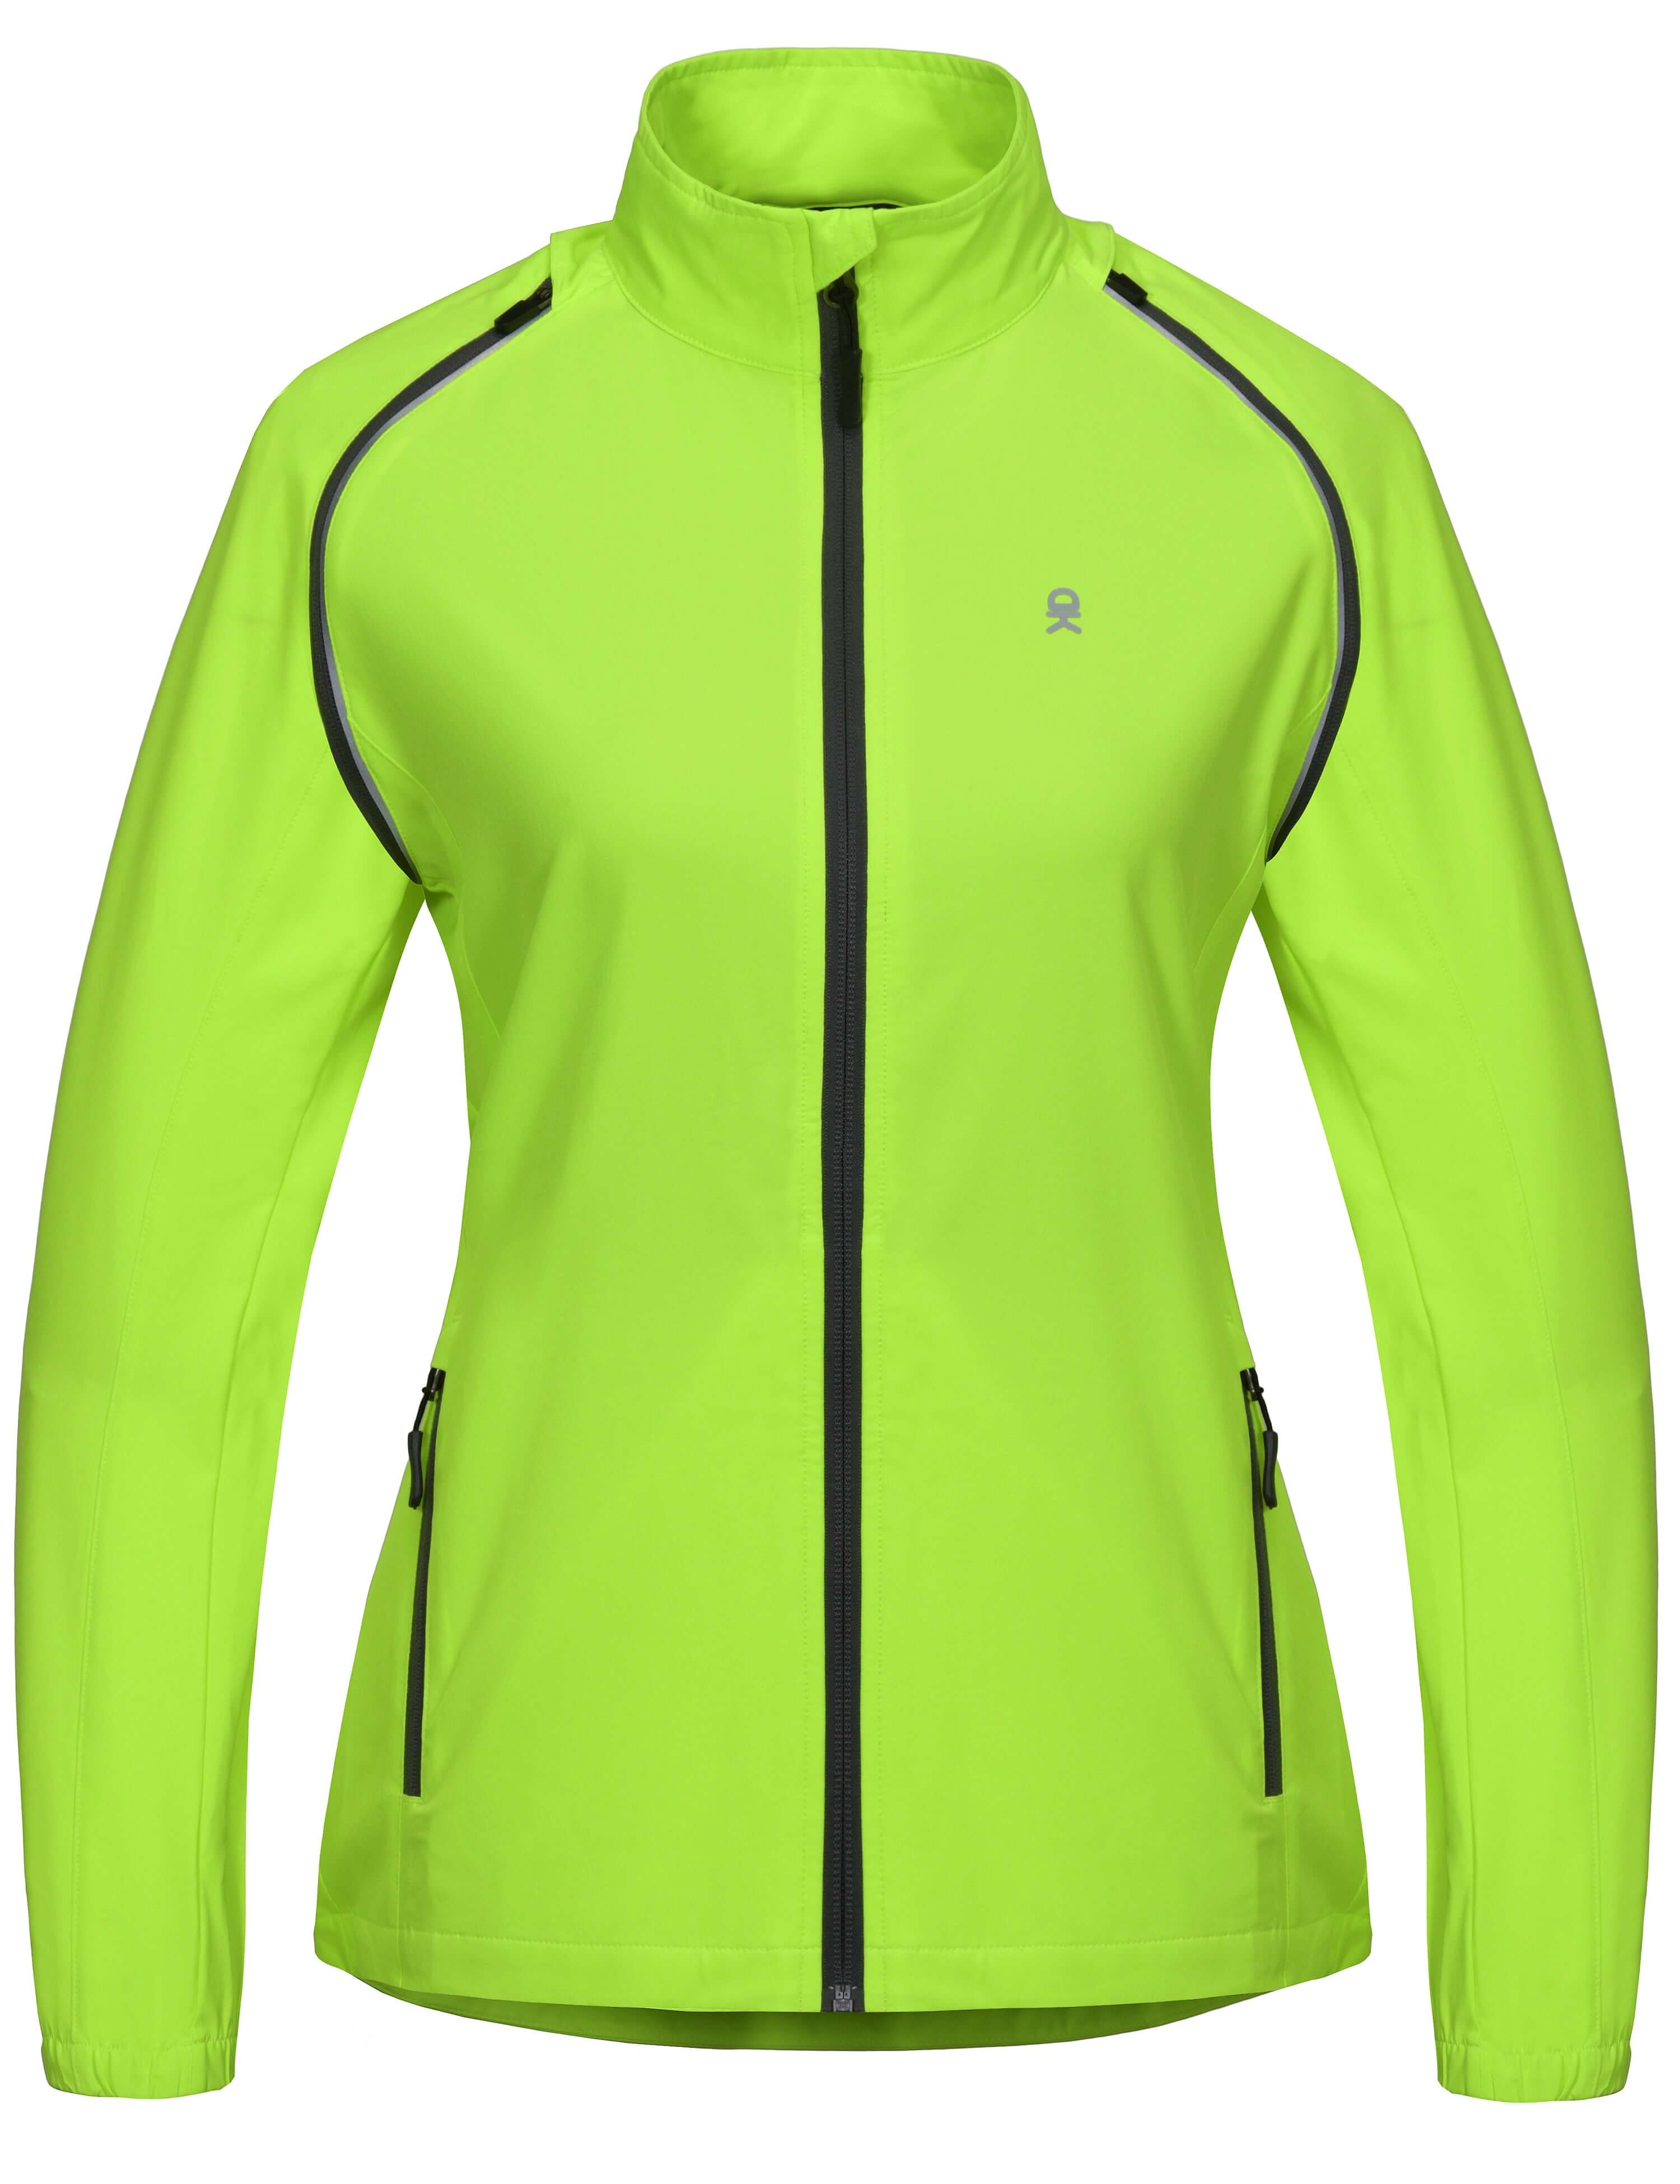 Women's Quick-Dry Convertible UPF 50+ Cycling Jacket – Little